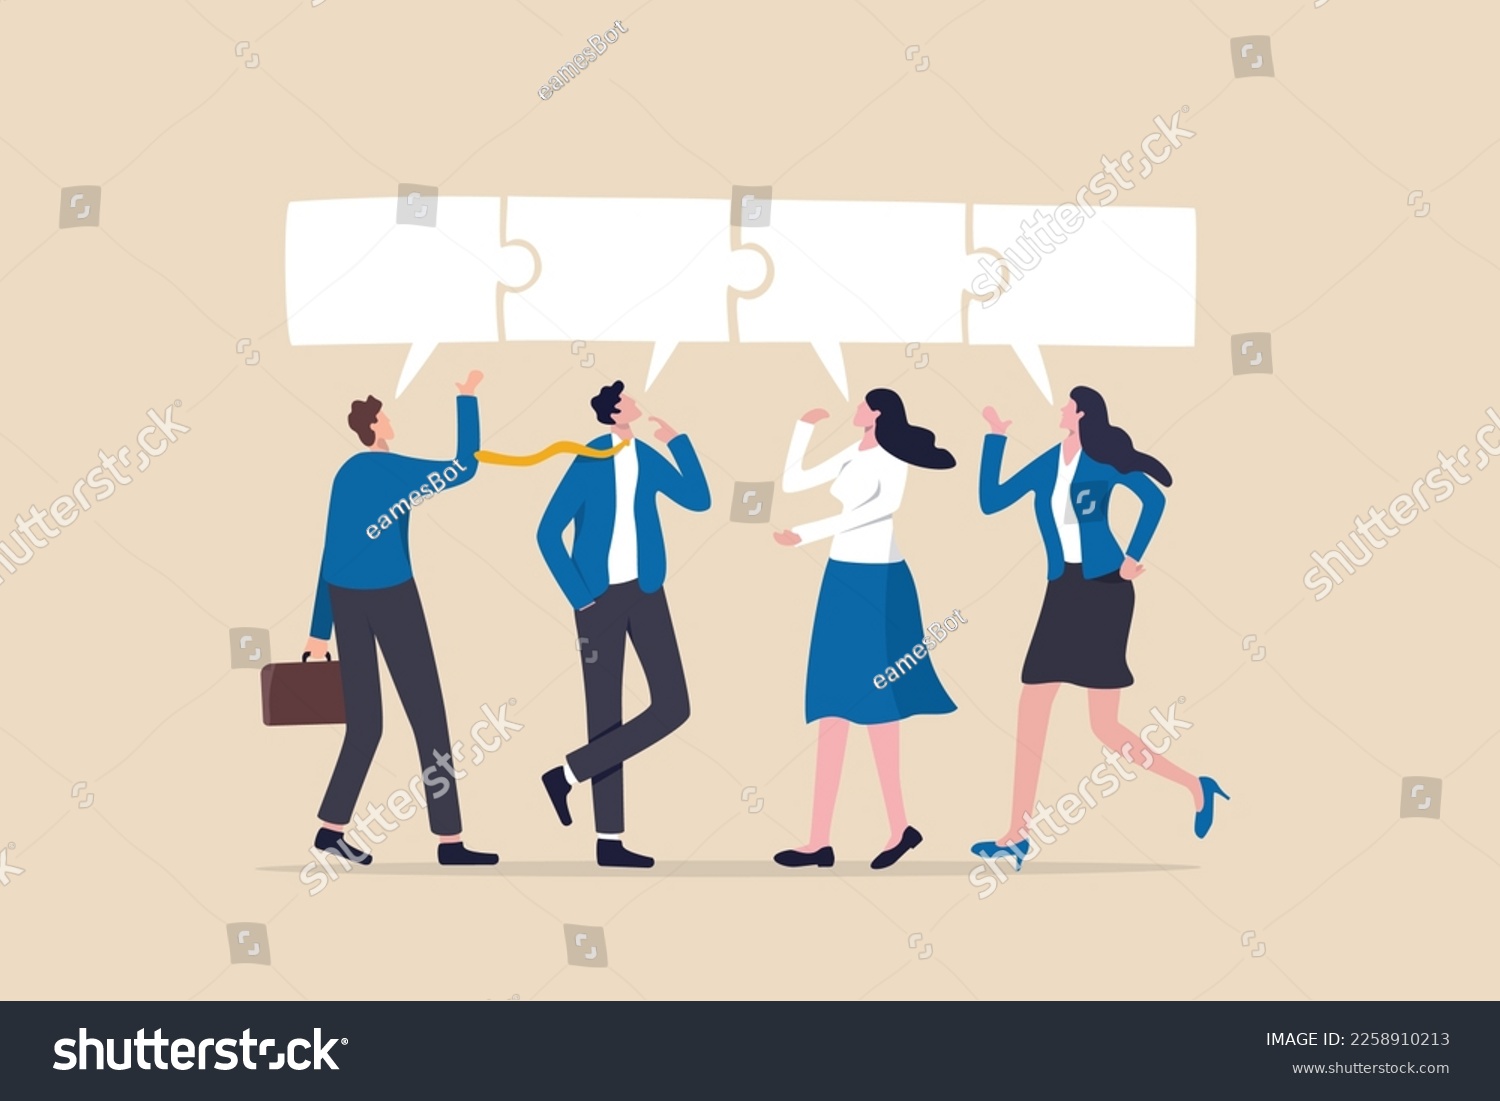 SVG of Conversation or communication for success, meeting discussion to get answer or solution, working together, partnership or collaboration concept, business people talk with speech bubble jigsaw connect. svg